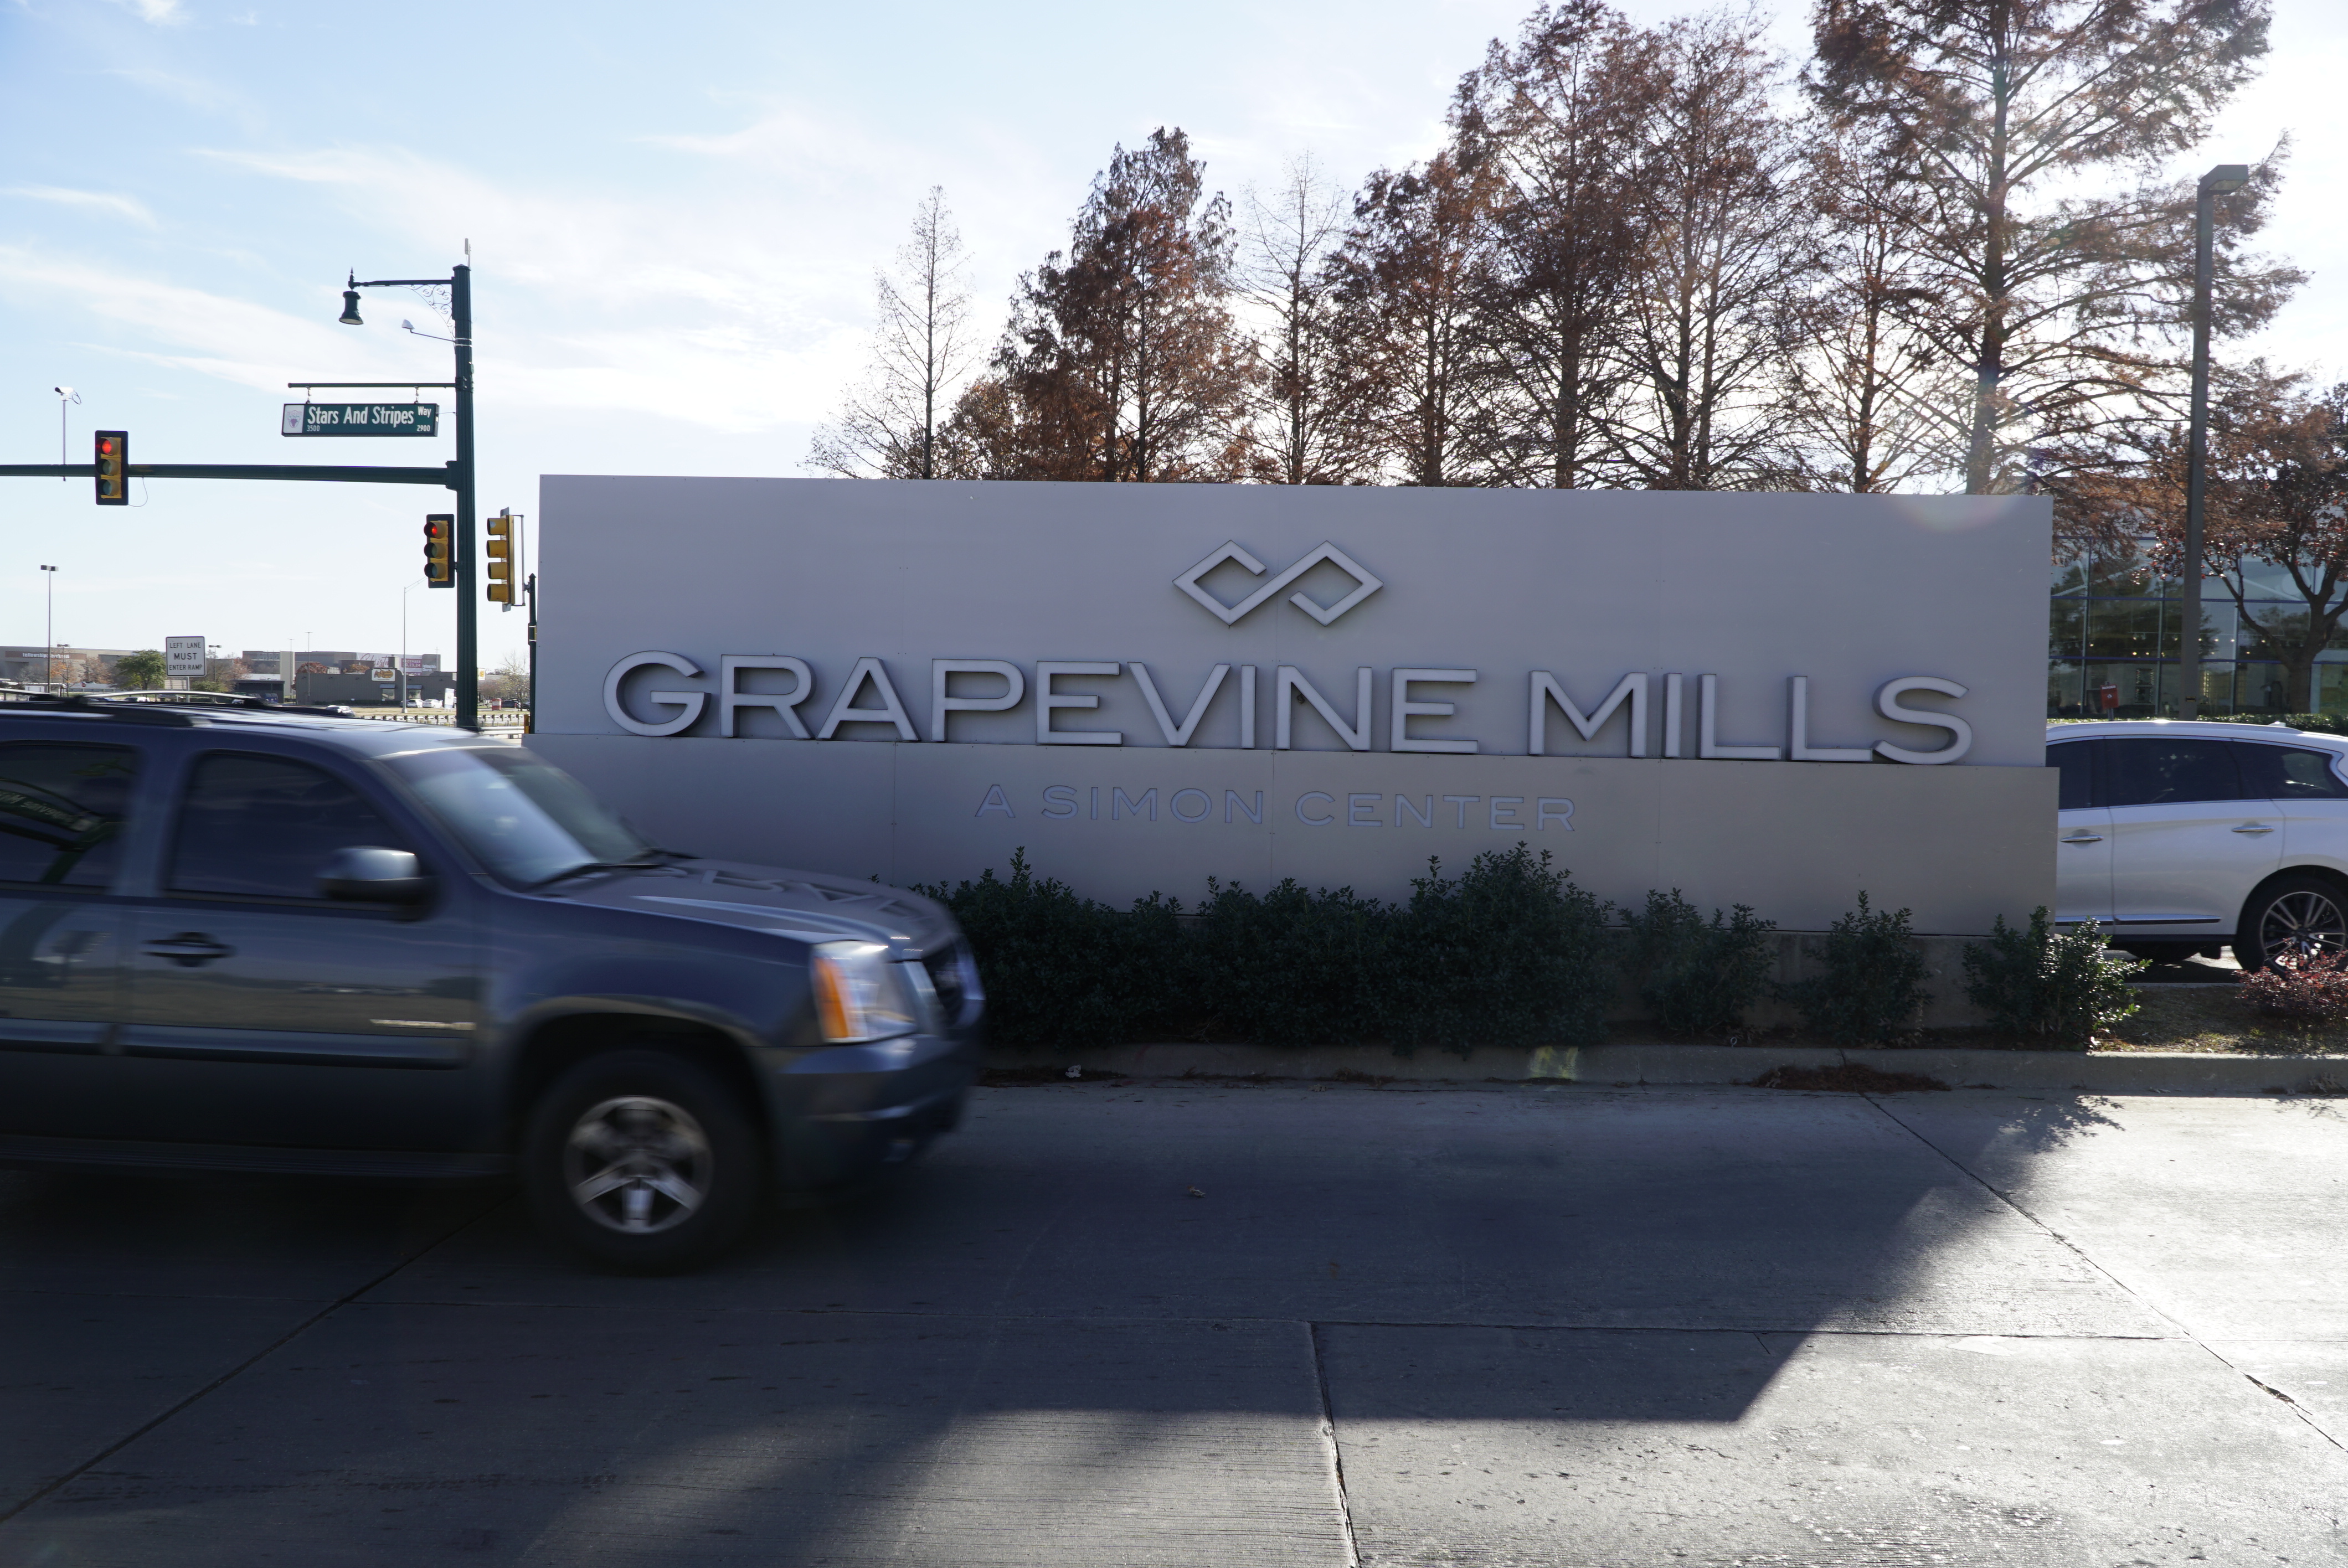 Here are the new brands coming to Grapevine Mills mall